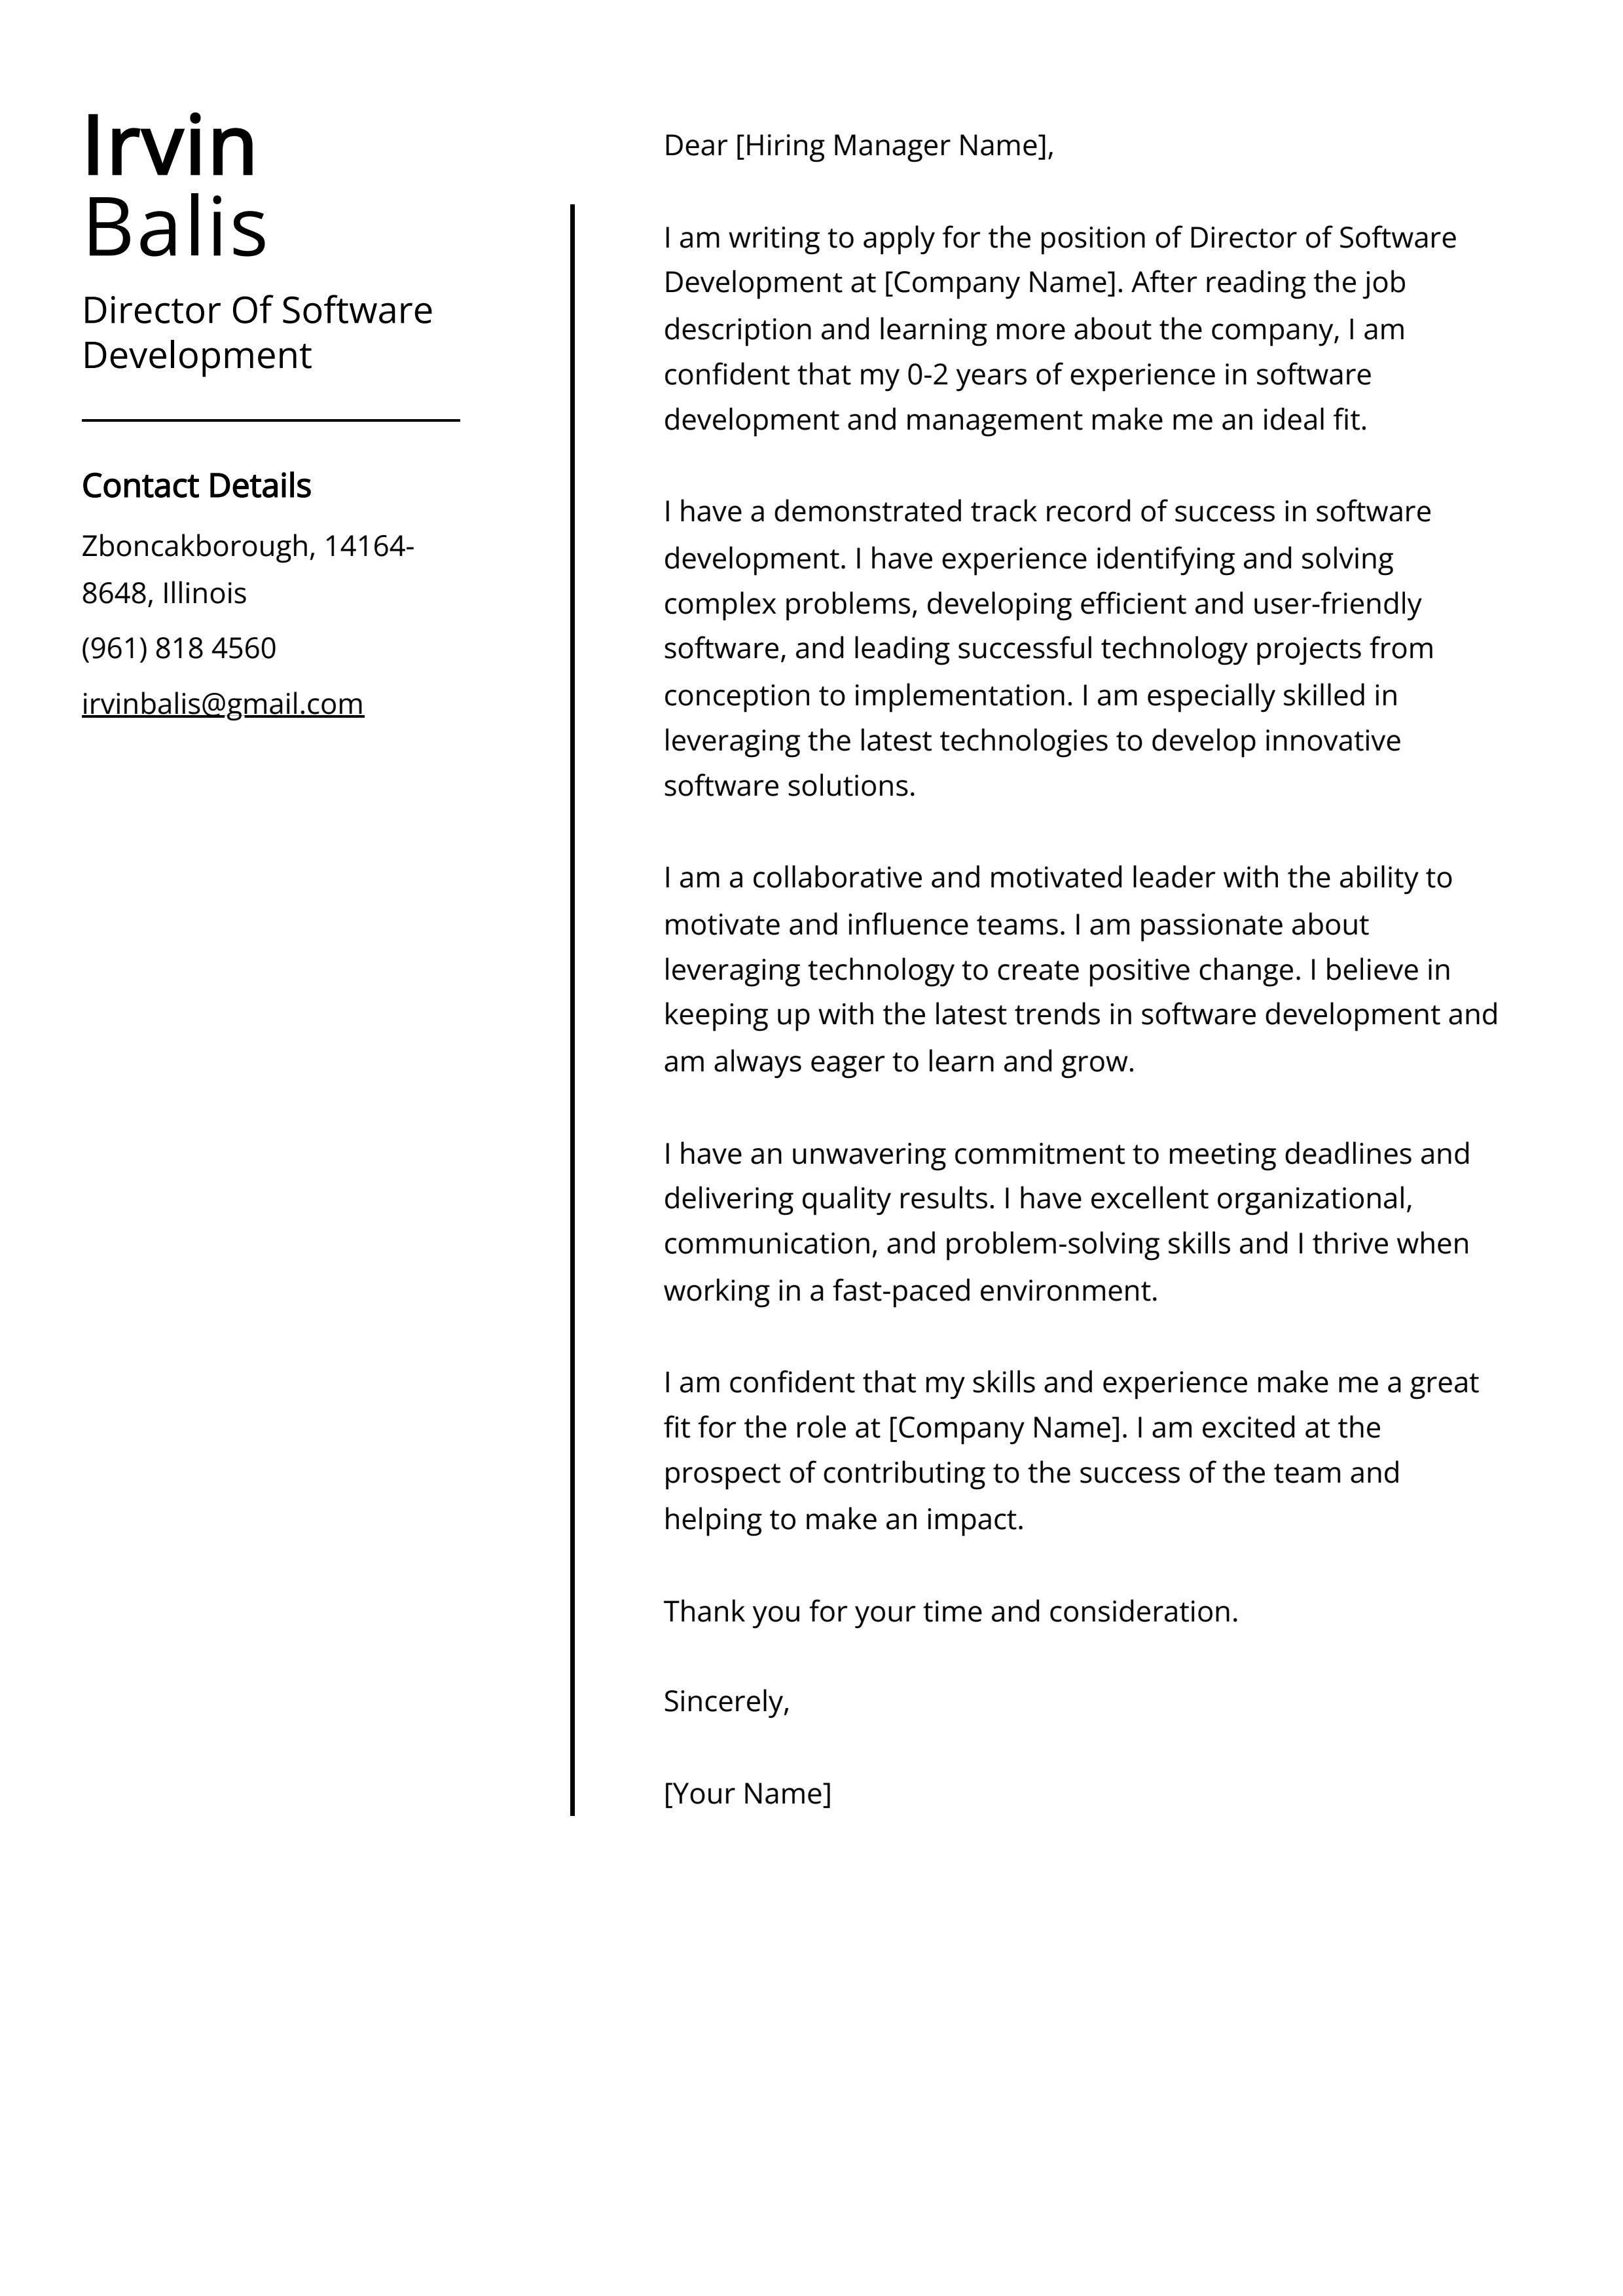 Director Of Software Development Cover Letter Example